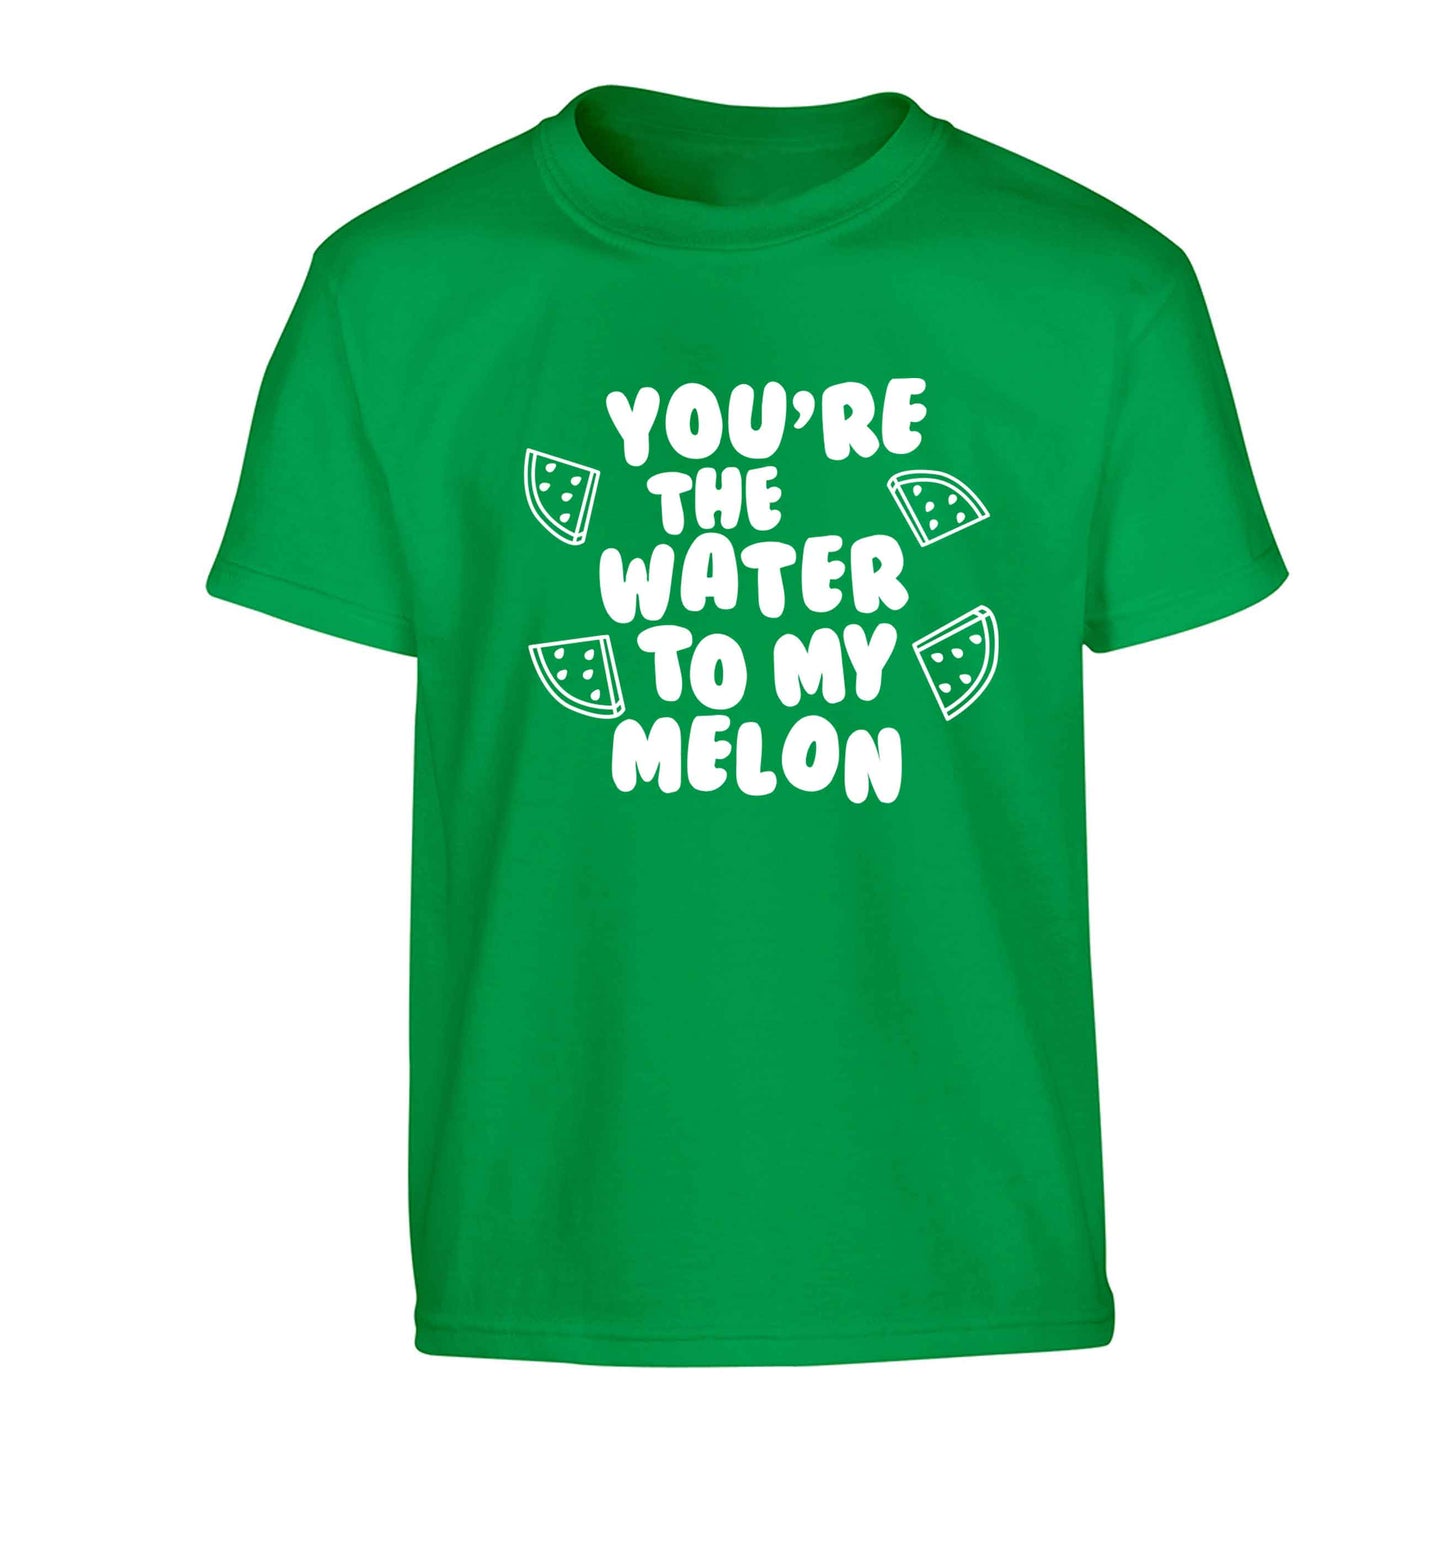 You're the water to my melon Children's green Tshirt 12-13 Years